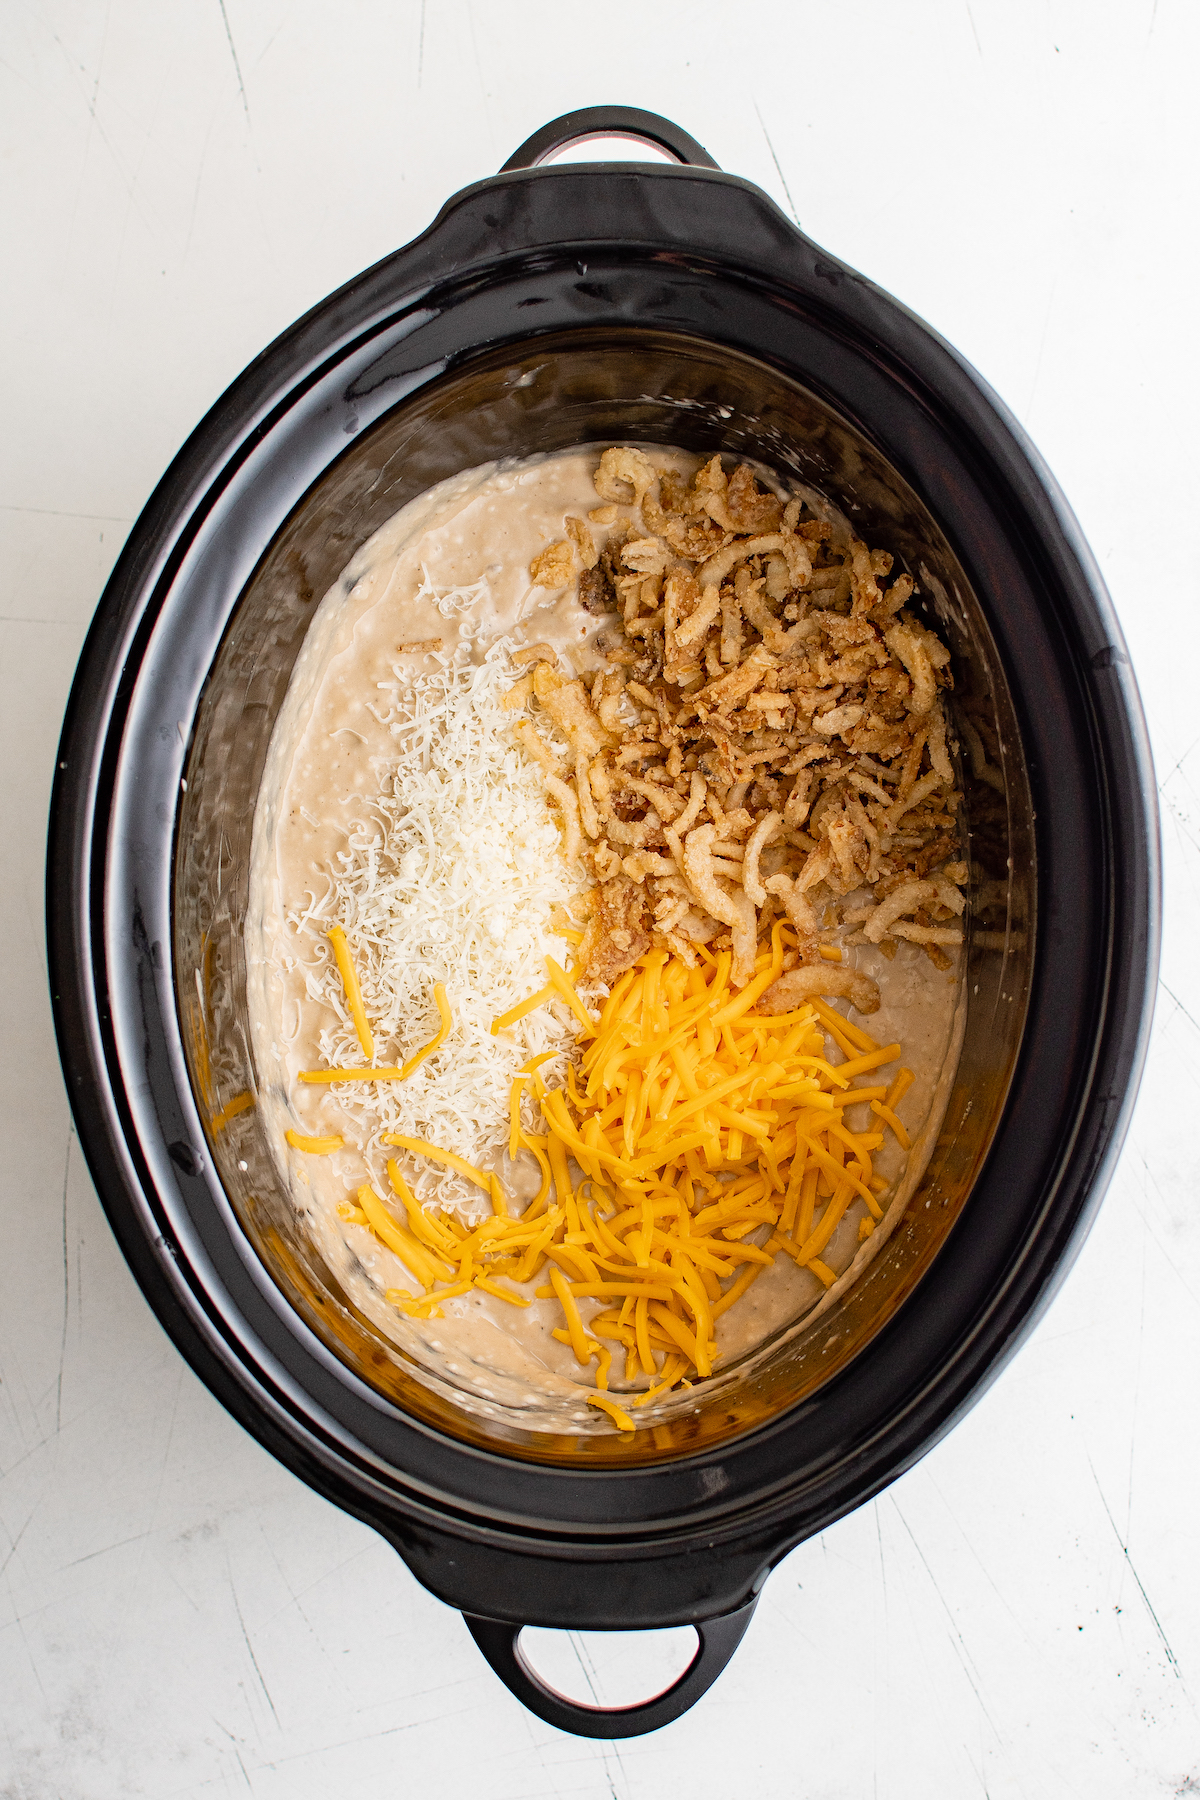 Creamy mushroom sauce in a slow cooker, with cheese and french fried onions on top.